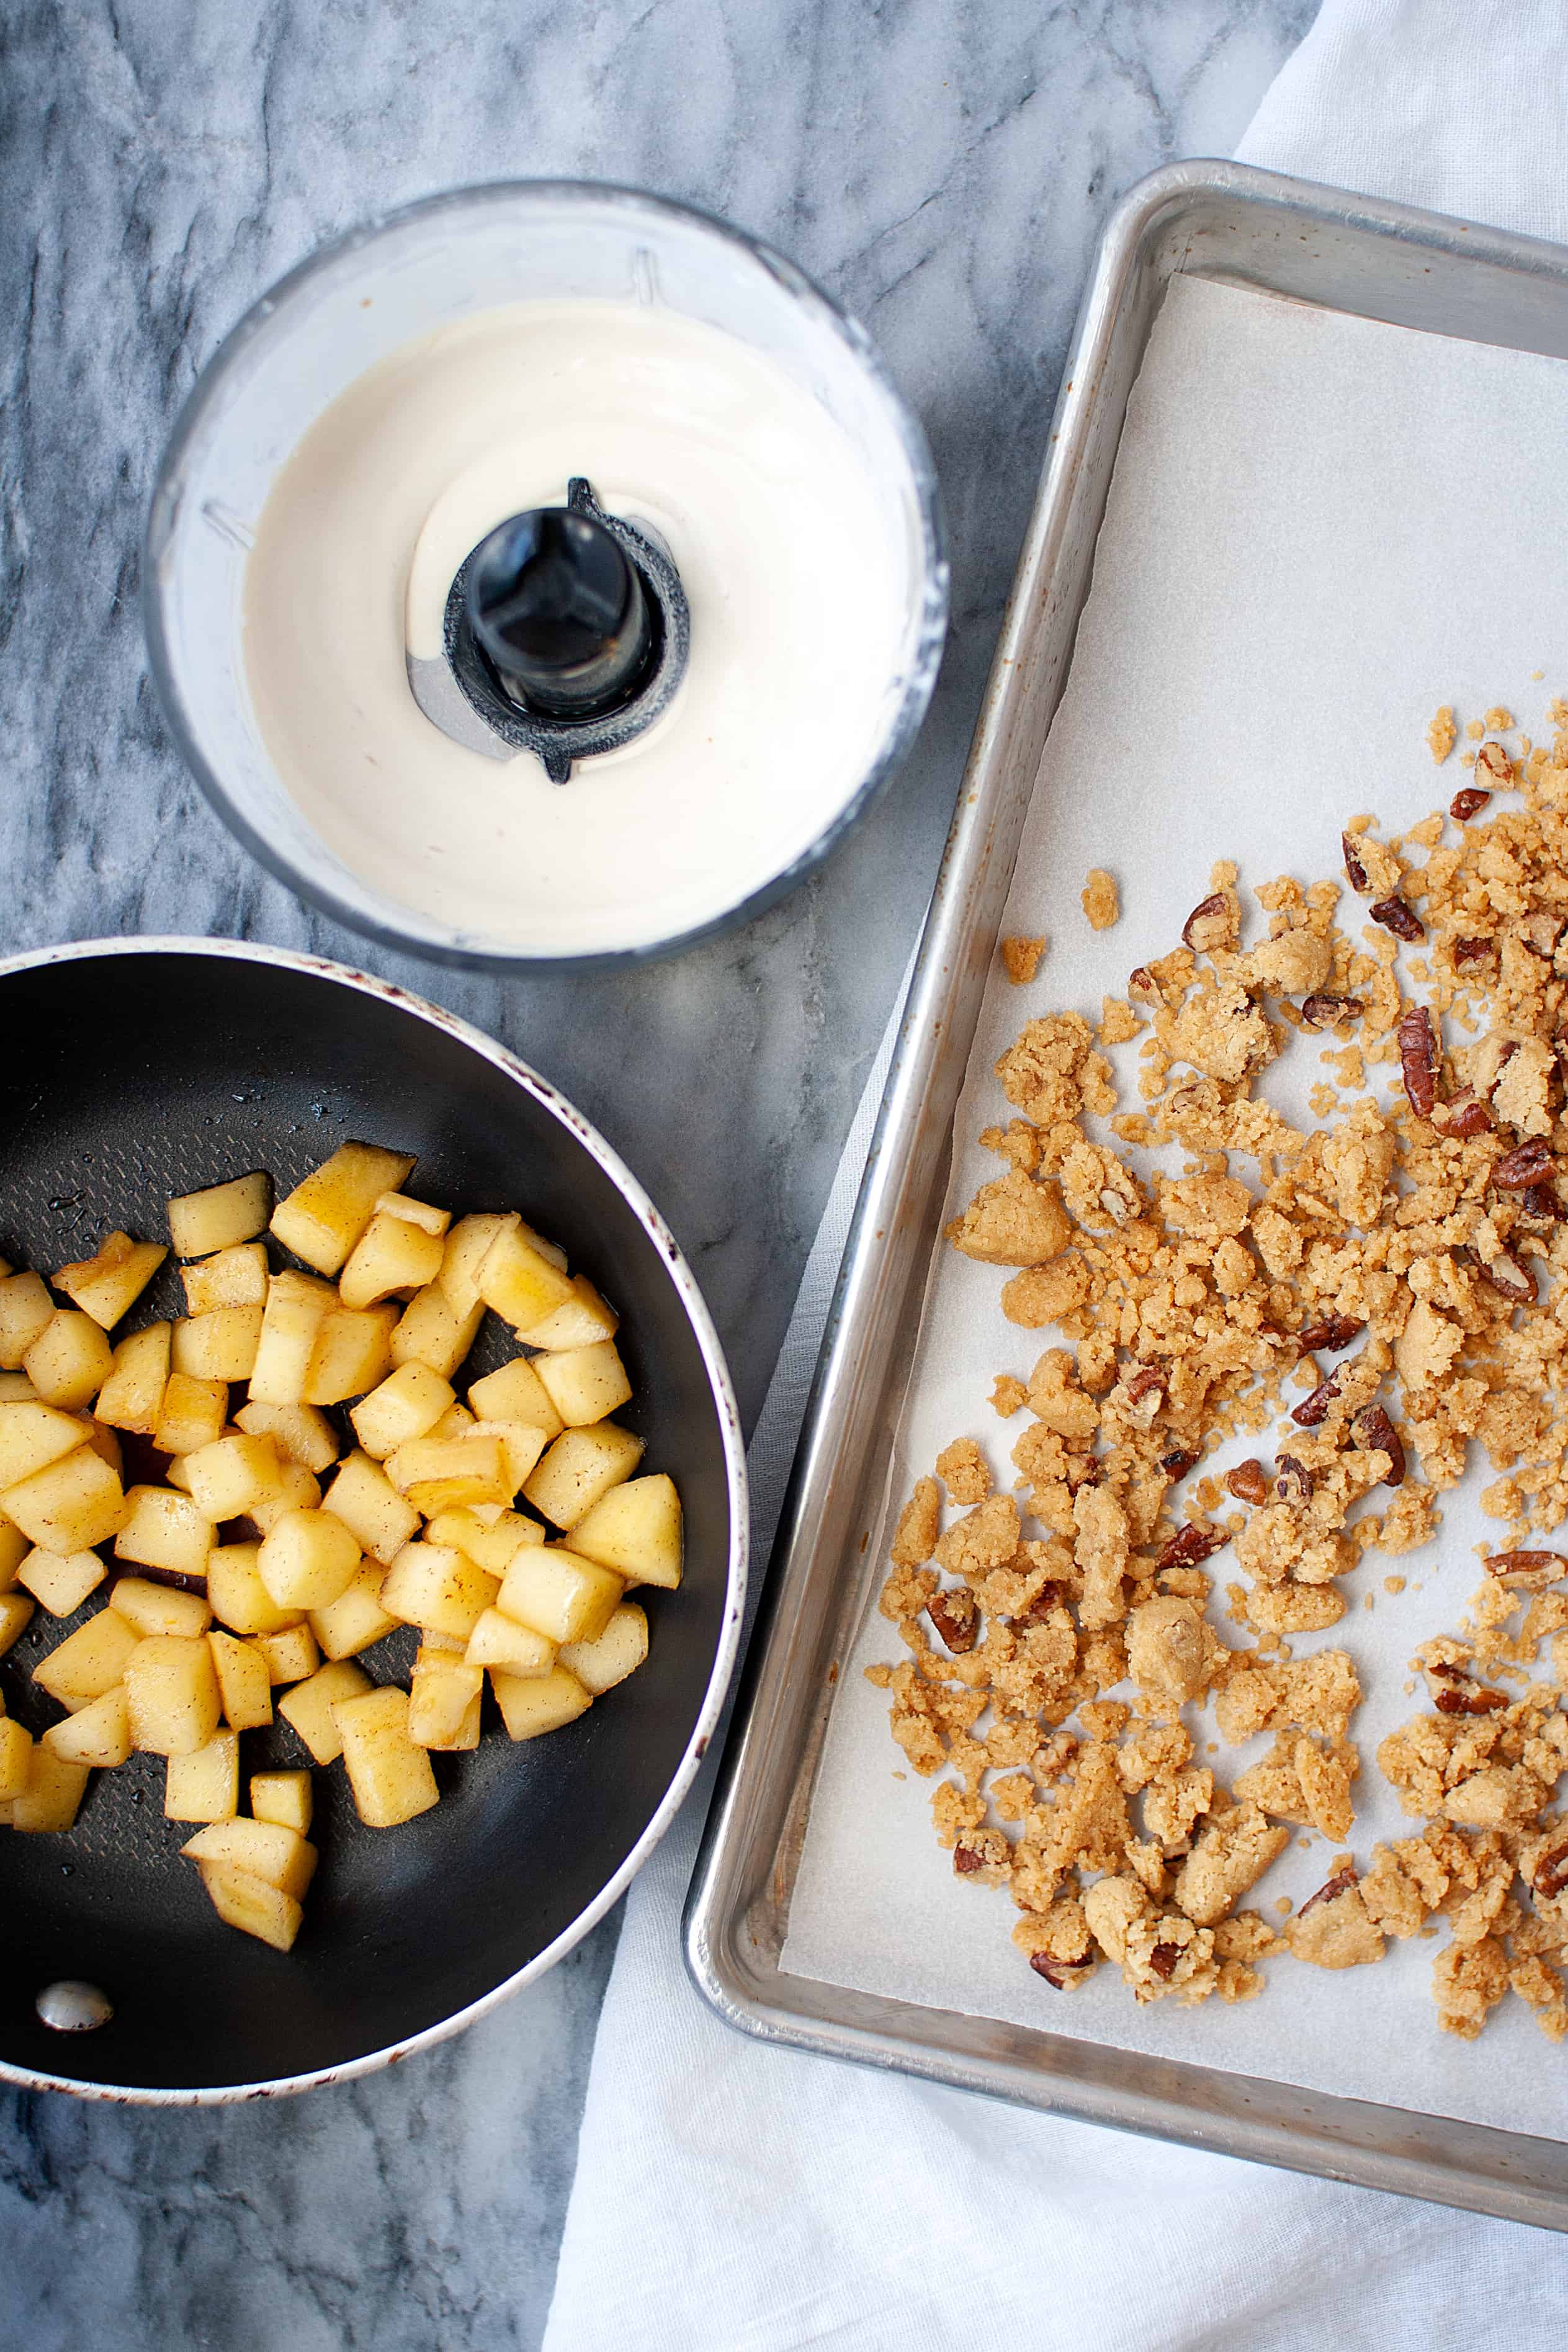 Ingredients for an Easy Apple Crisp for Two